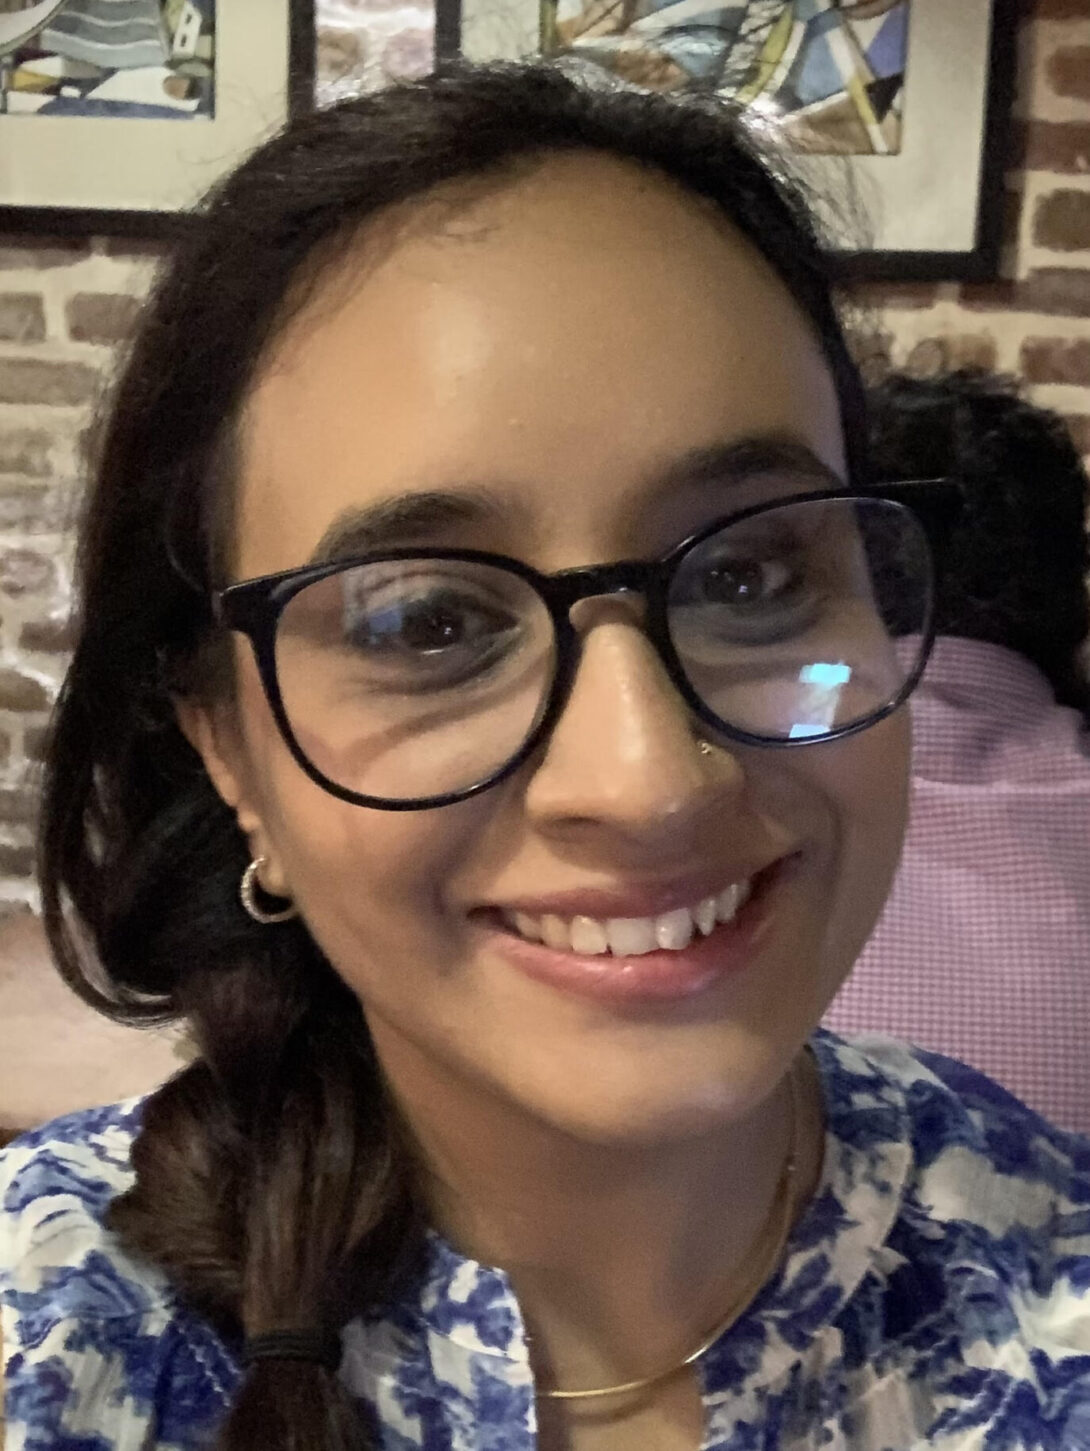 Close up head shot of brown woman with black round-rectangular rimmed glasses, braided hair to the side, wearing a blue and white floral shirt smiling into the camera